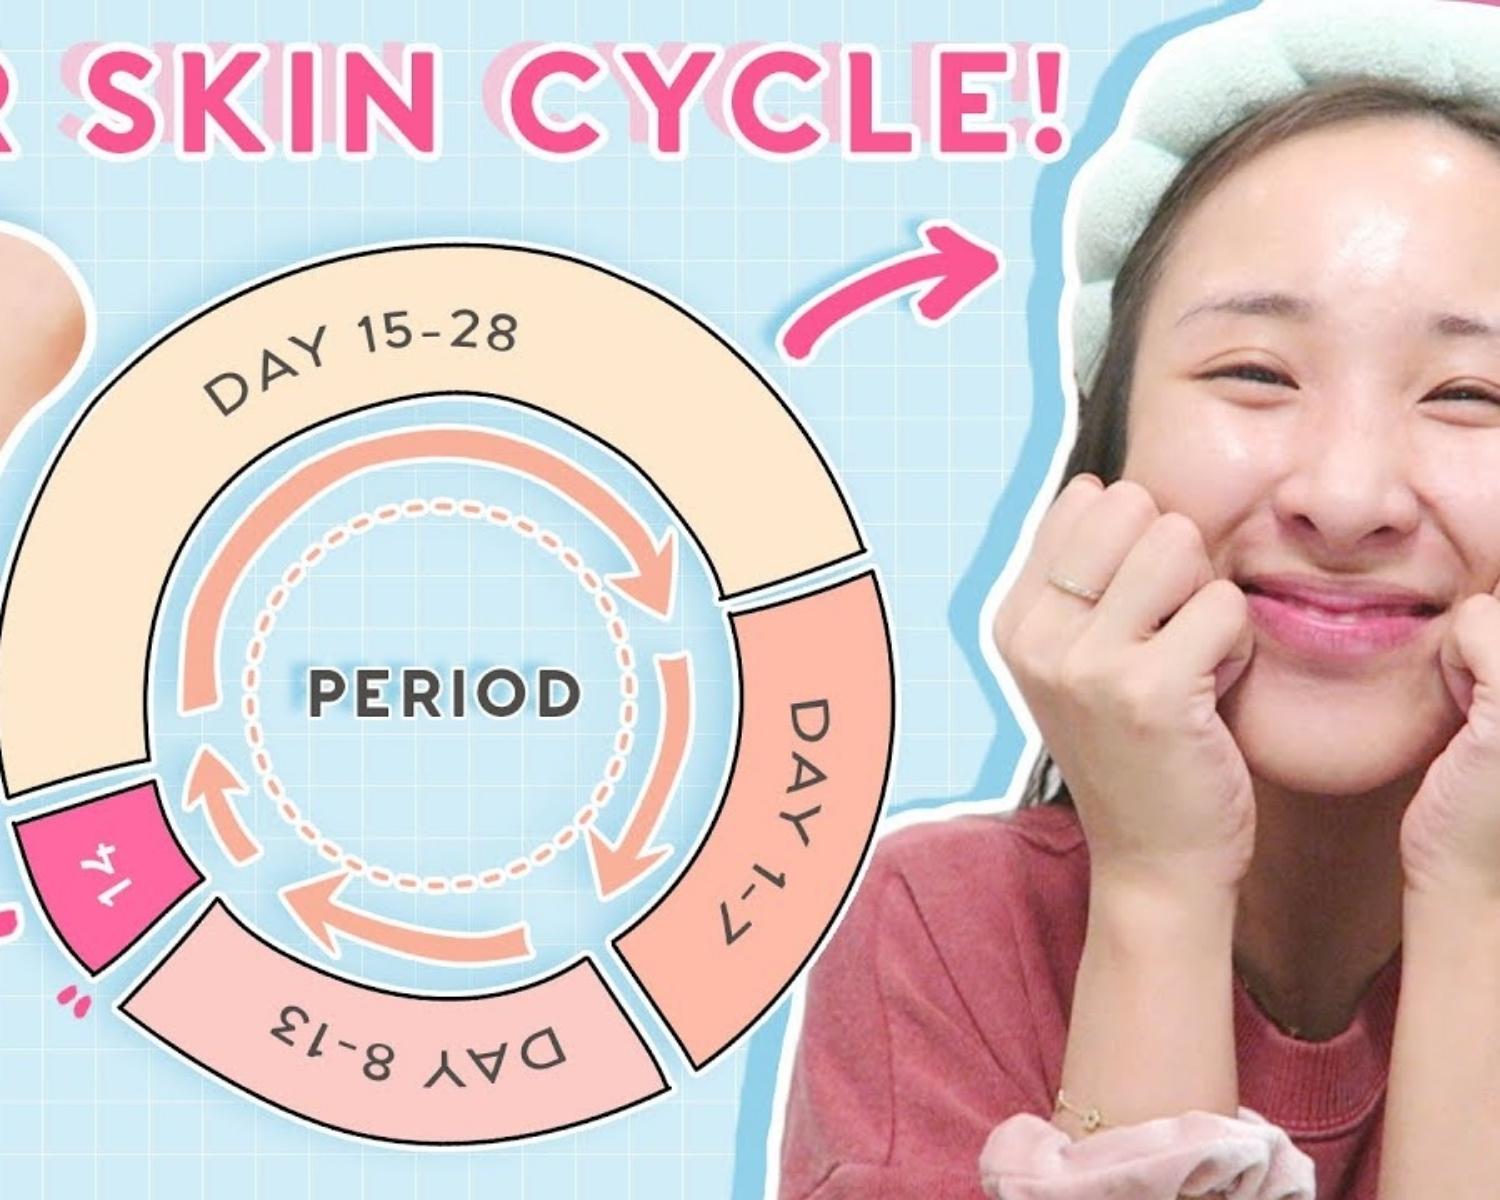 Period Skincare A.k.a Cycle Syncing